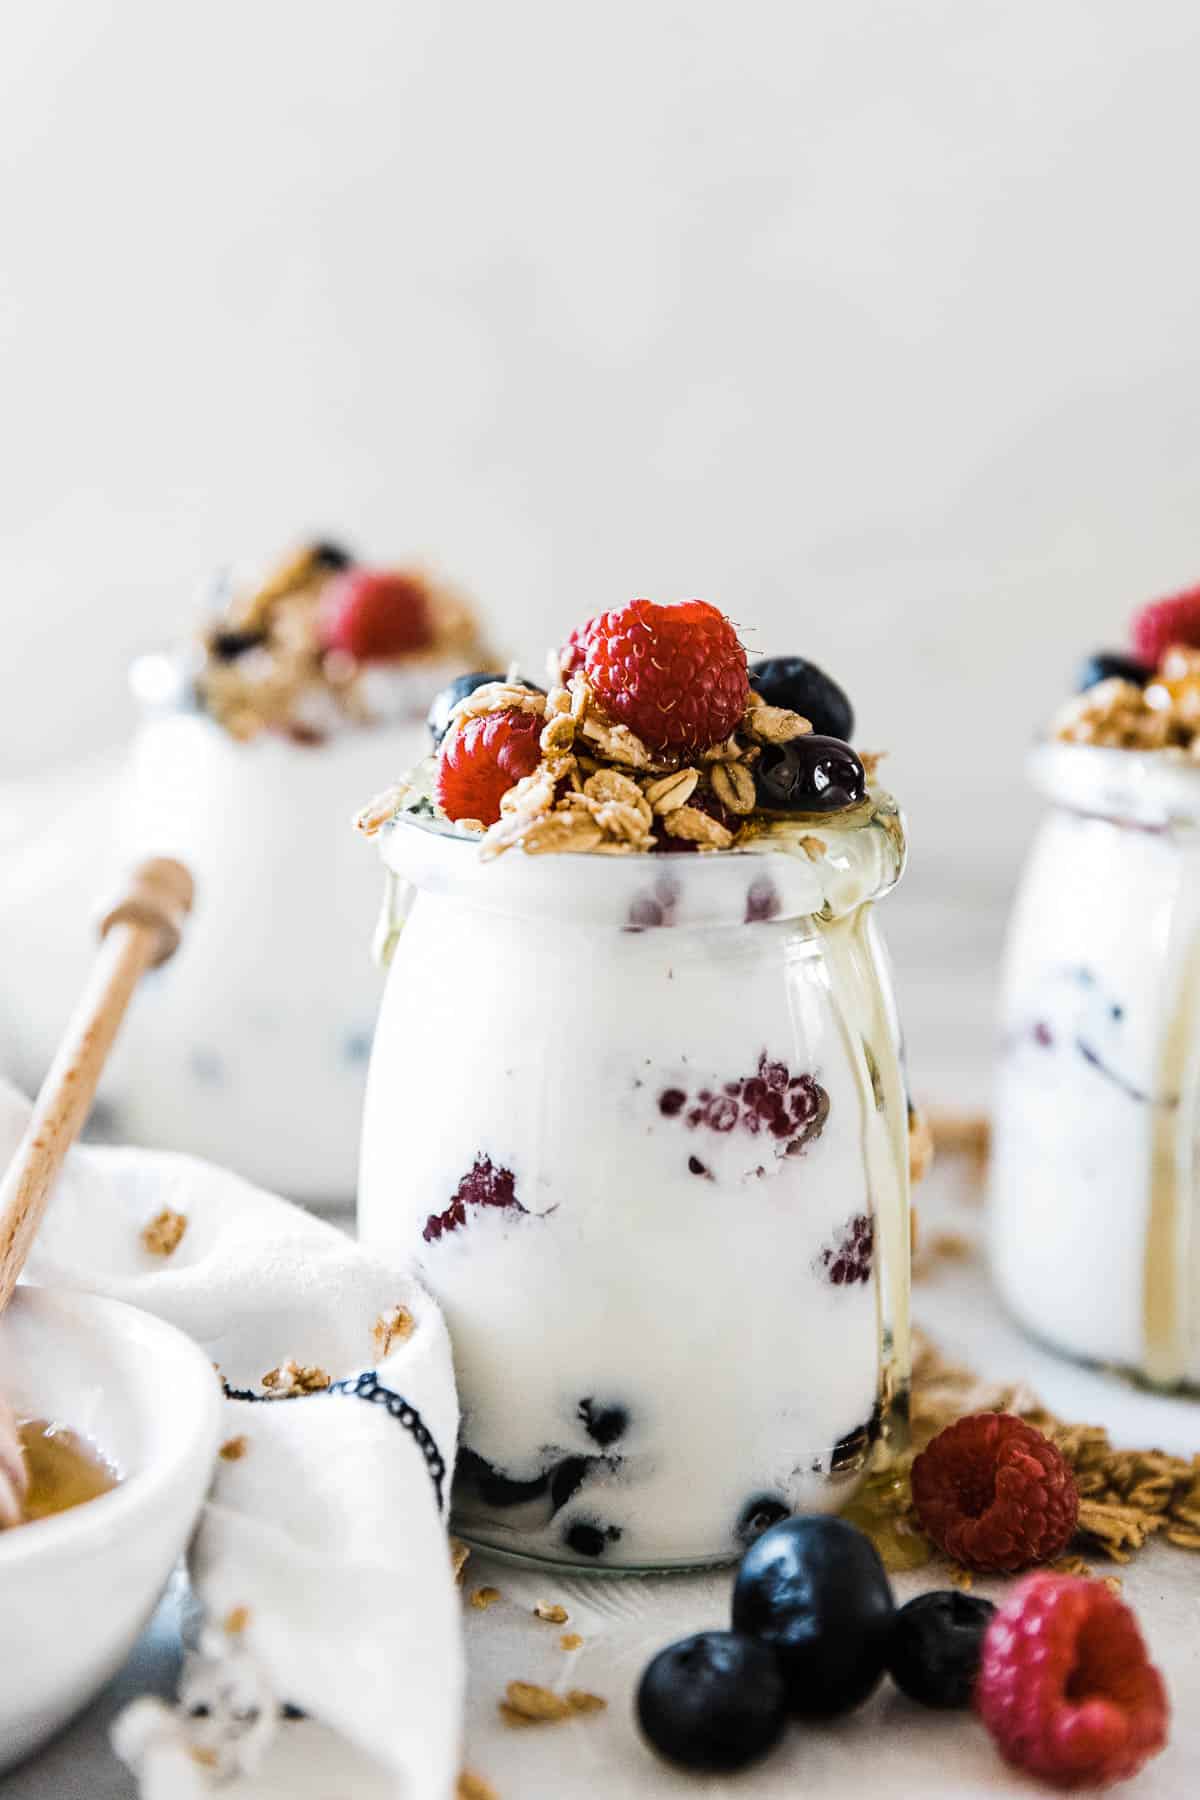 Pressure cooker yogurt recipe in glass jars. They are topped with fruit and granola.